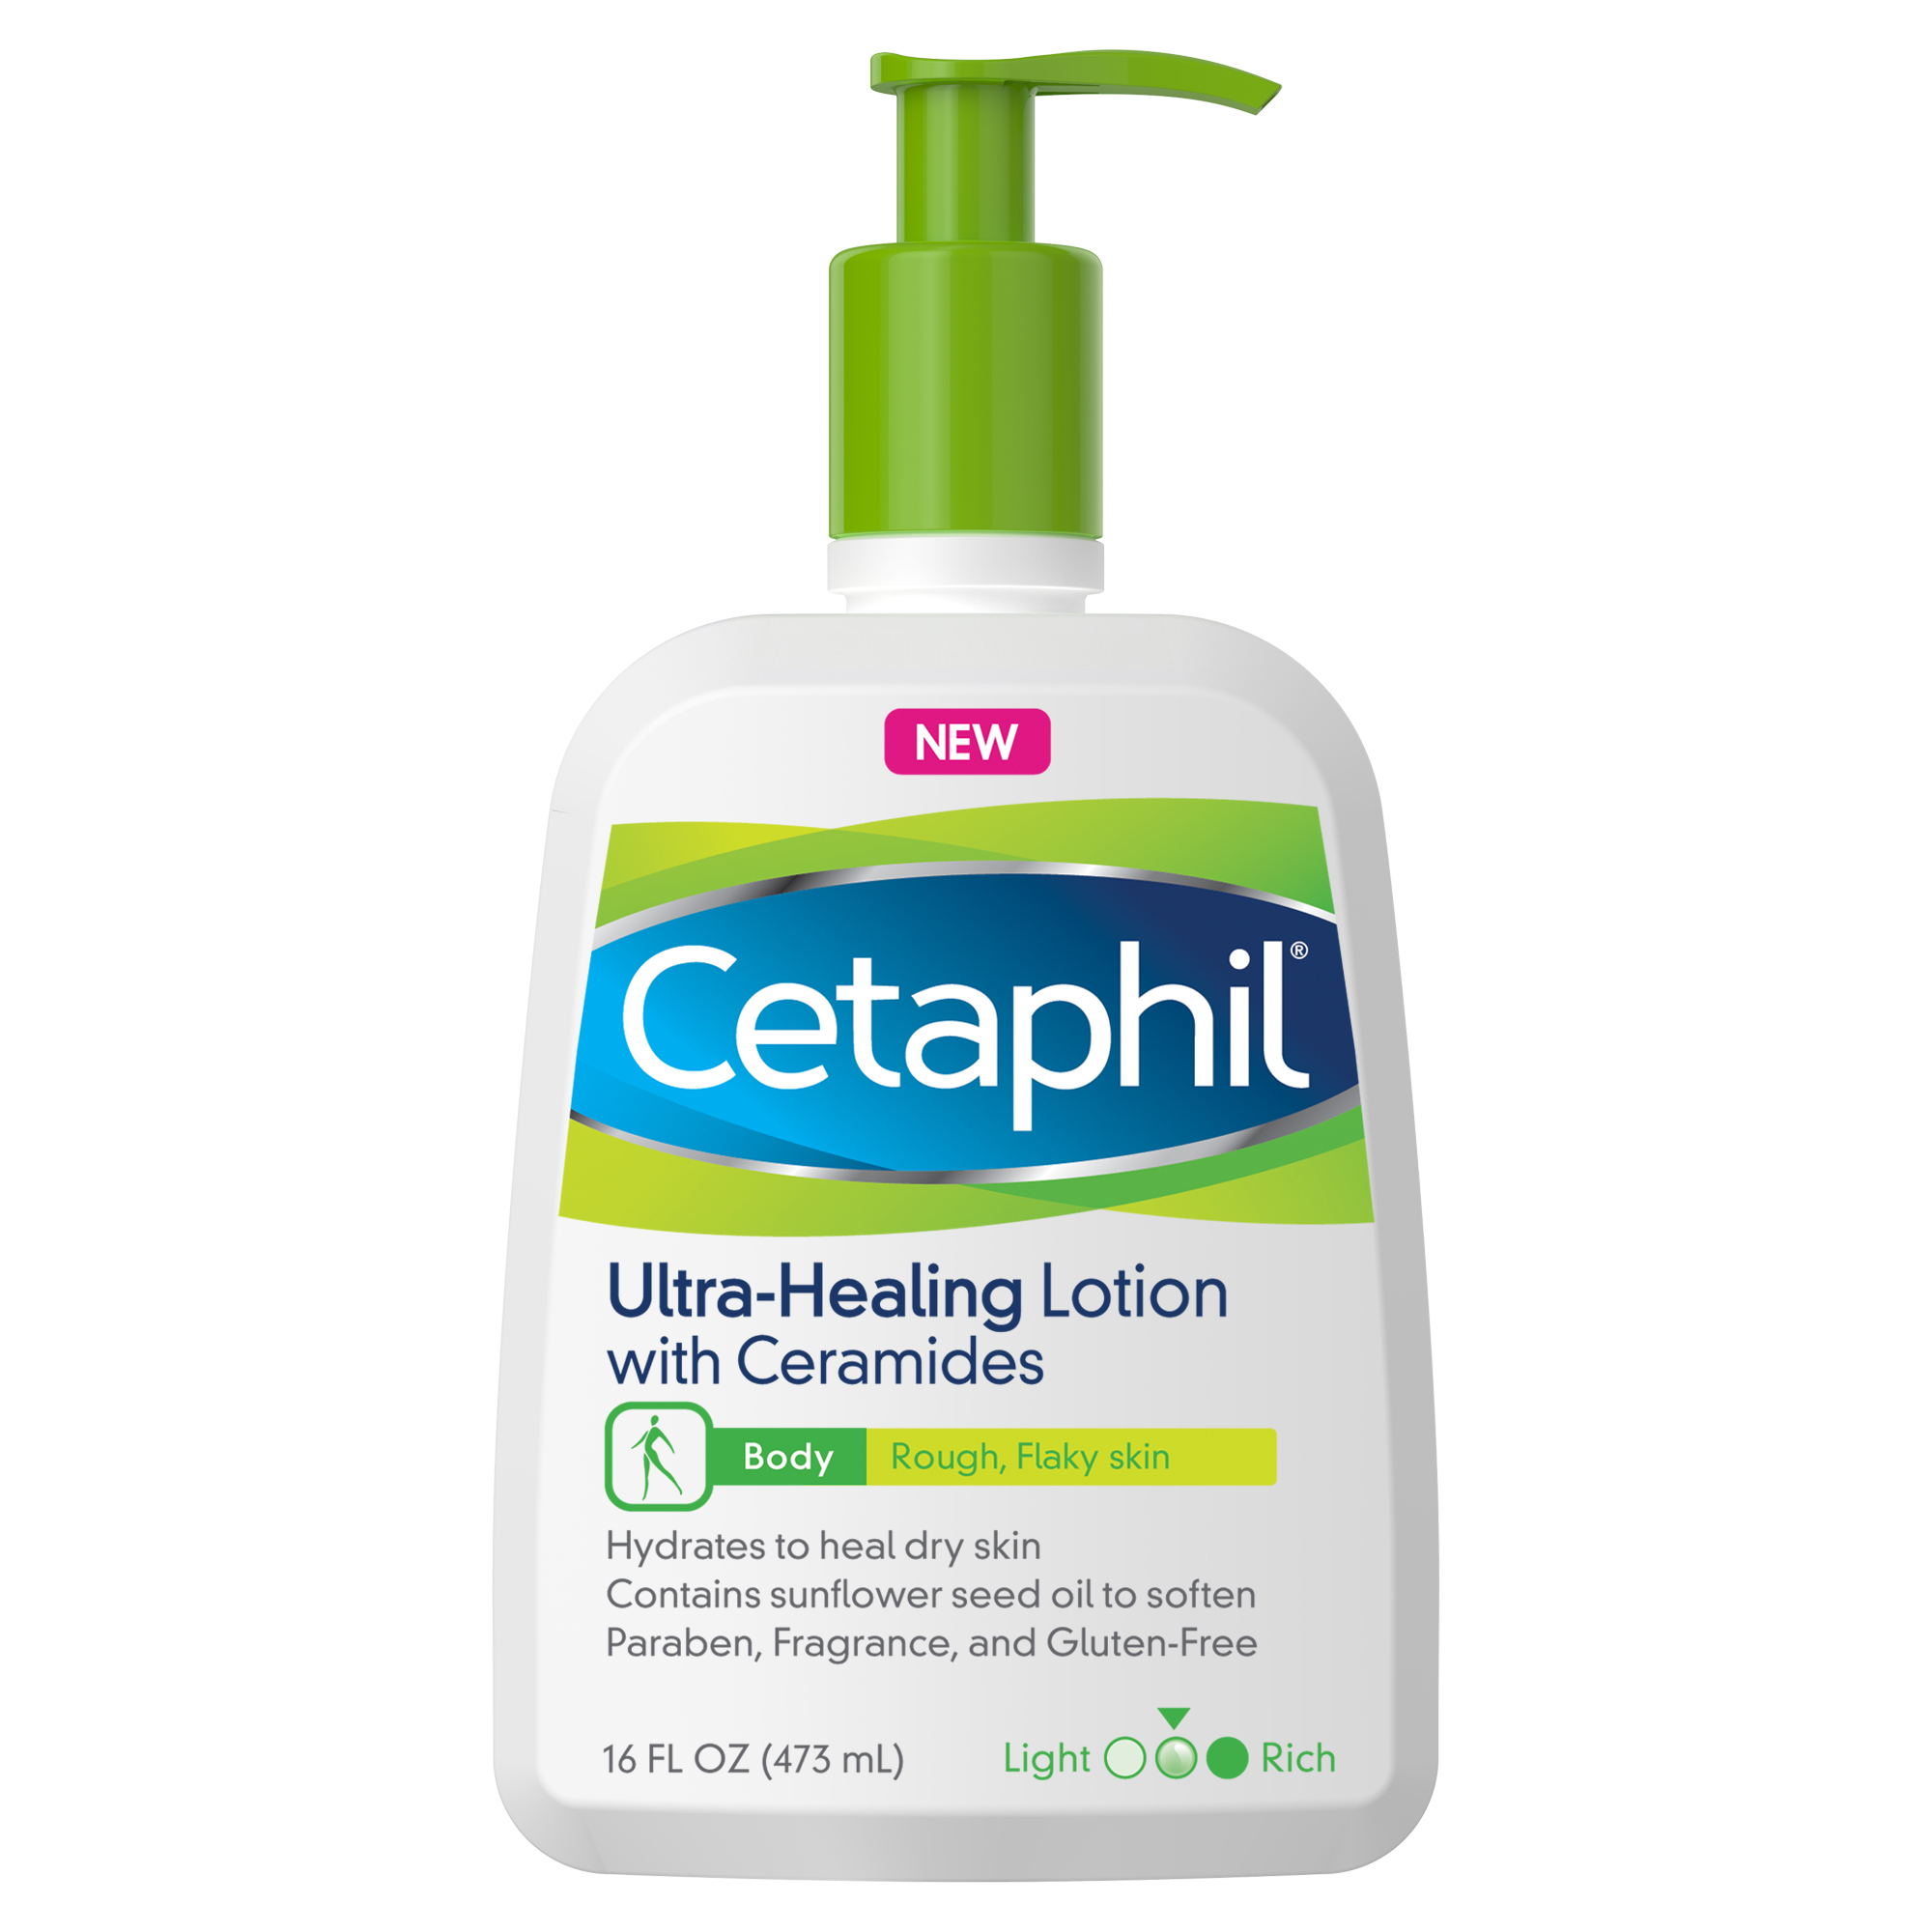 Cetaphil Intensive Healing Lotion with Ceramides, For Dry, Rough, Flaky Skin, 16 oz - image 1 of 11